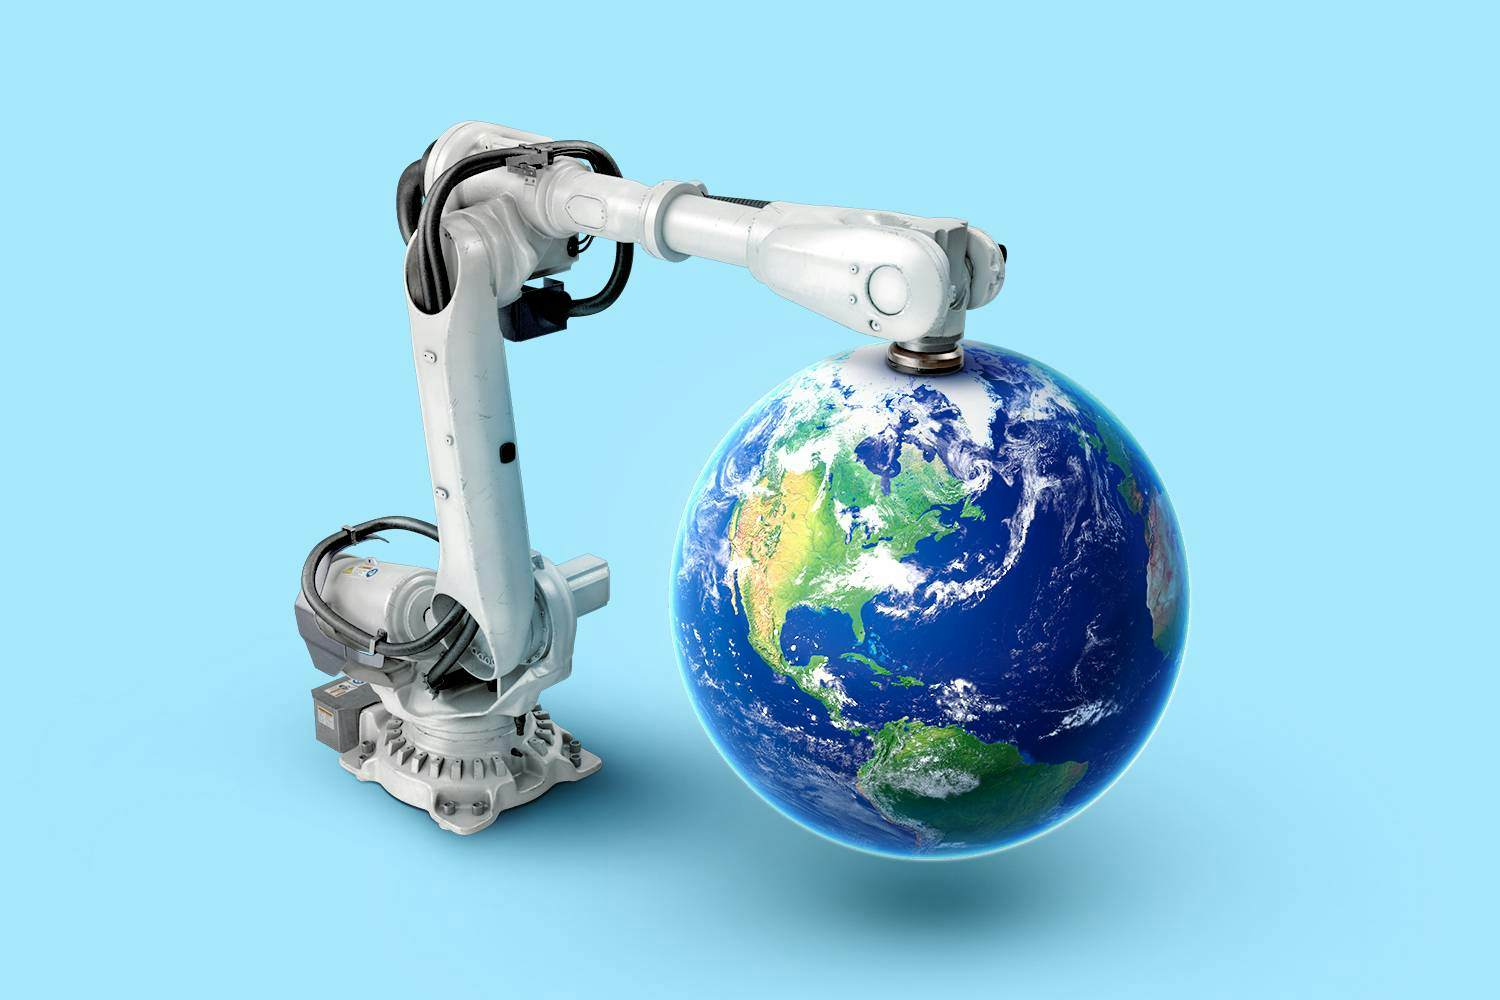 Robotic arm and Earth